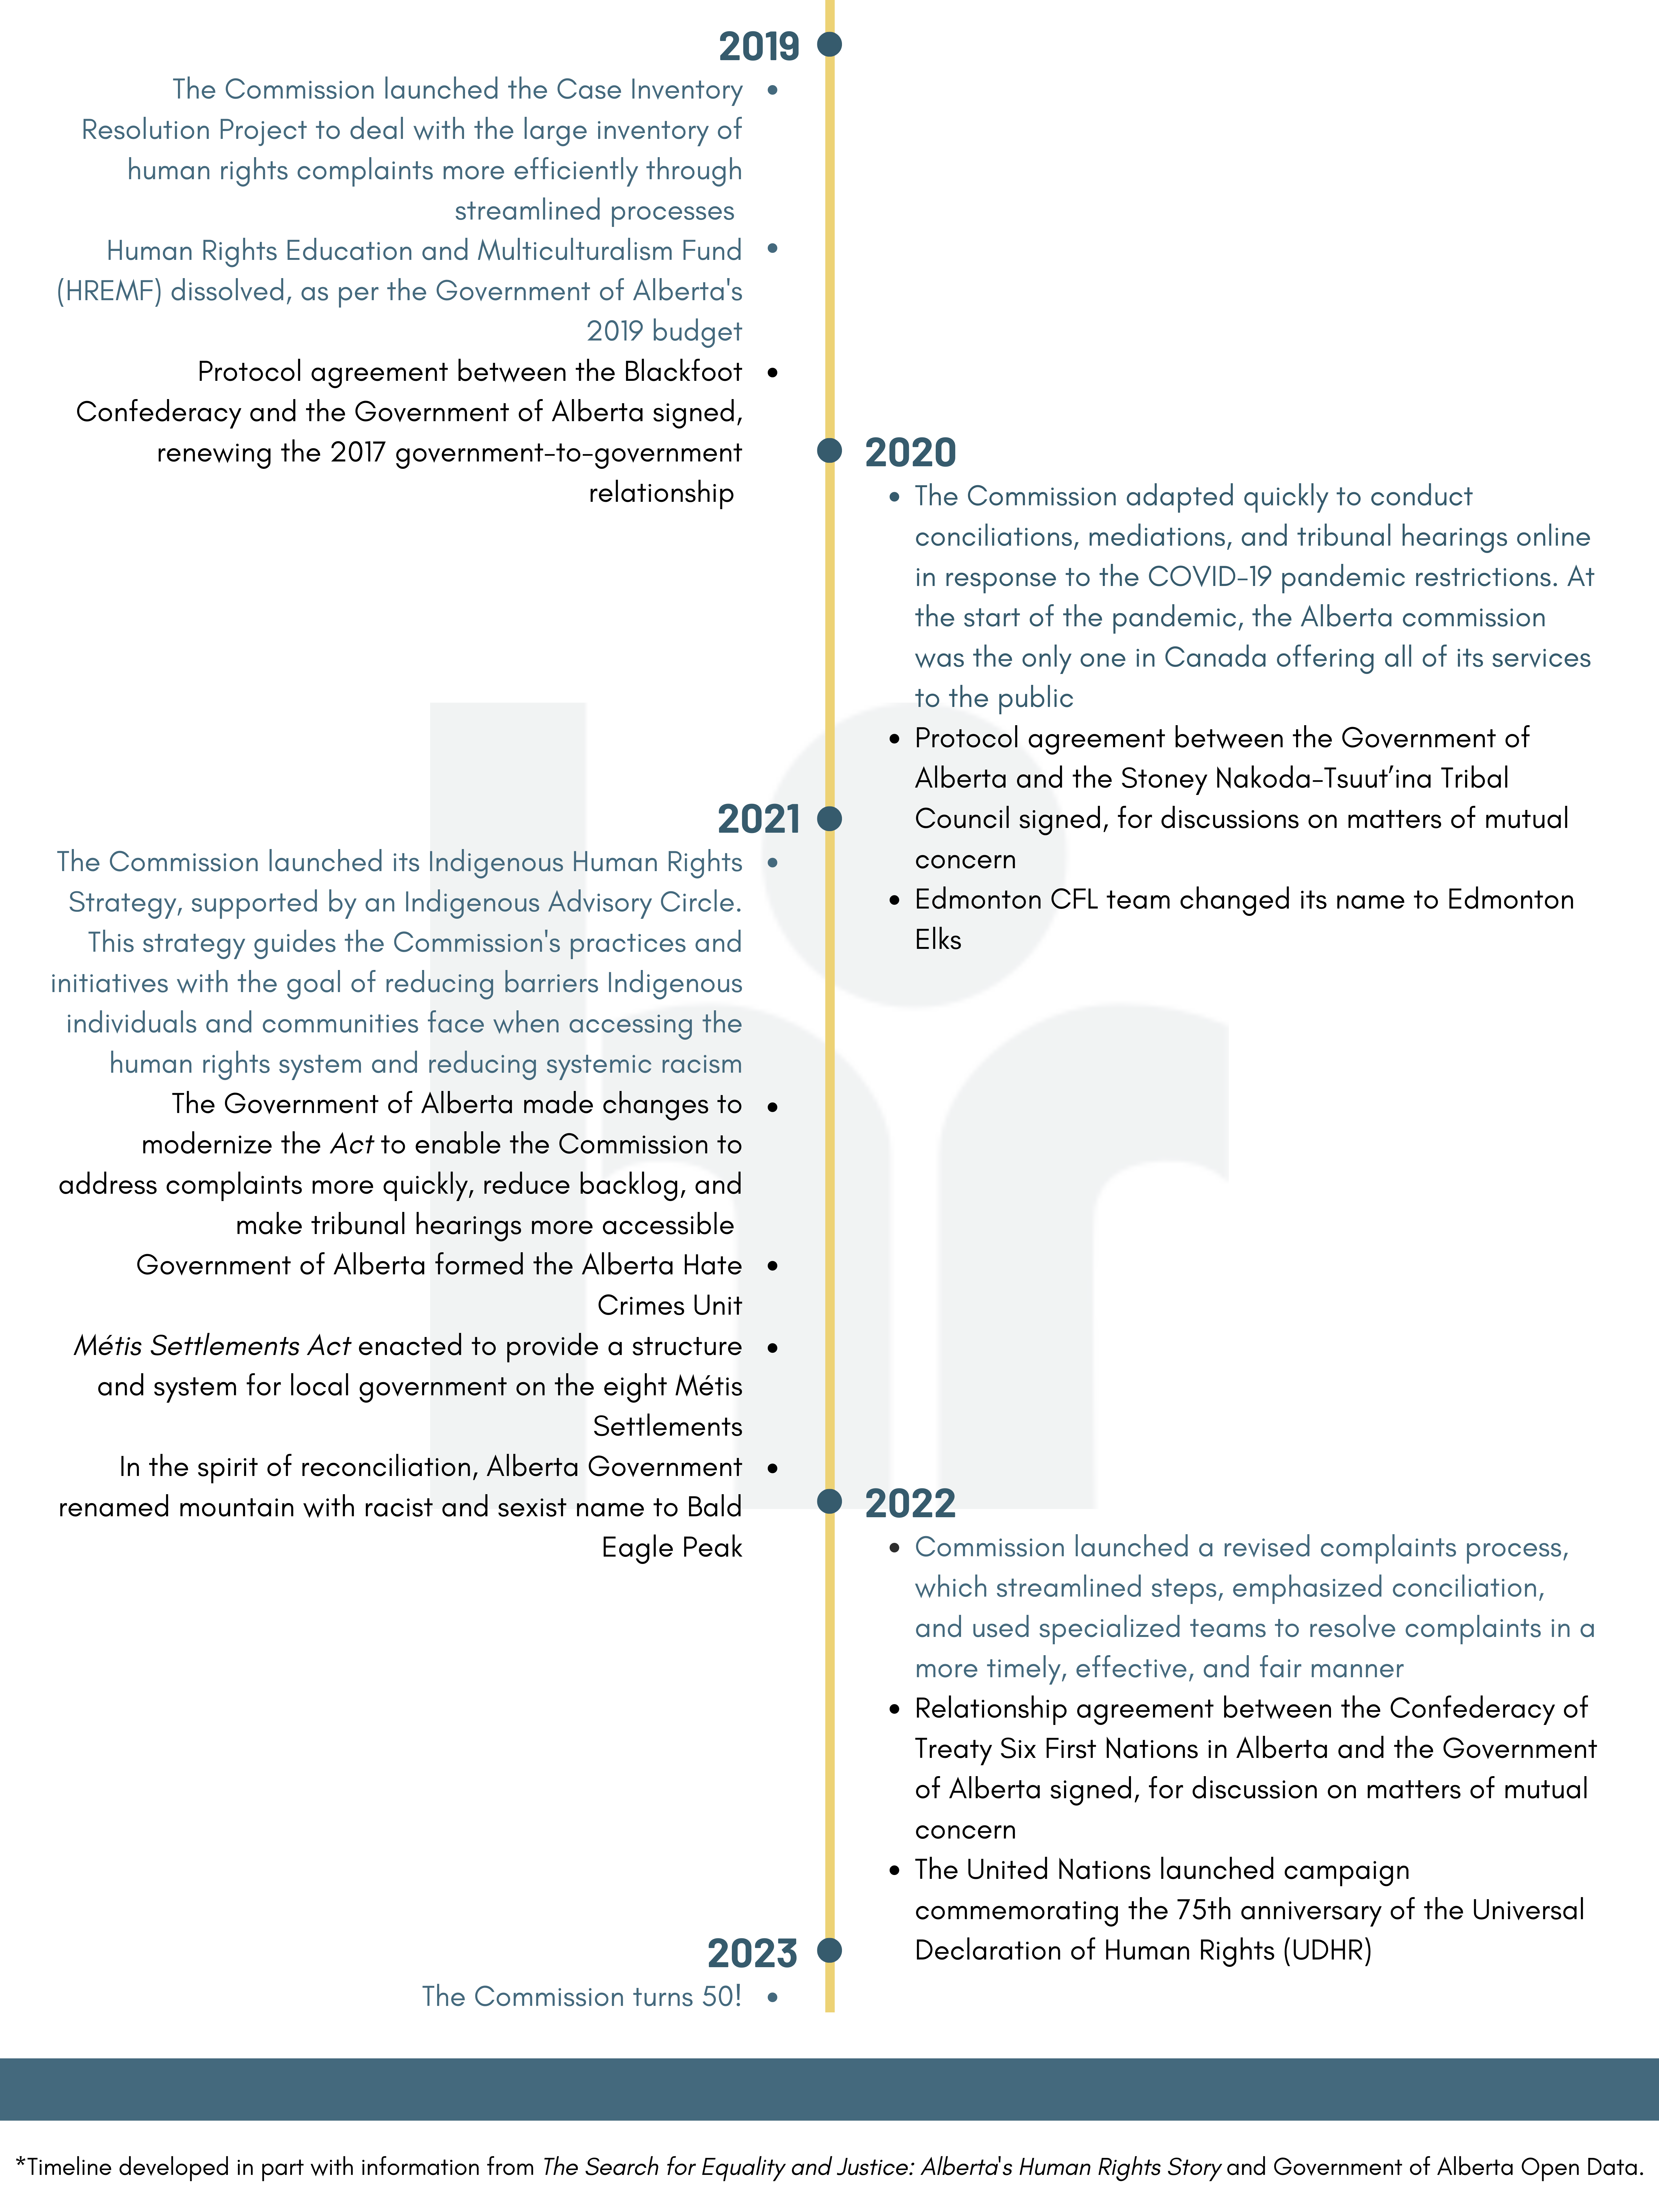 Timeline from 2019 to 2023 describing significant events in Alberta's human rights history. See link at top of page for full text.